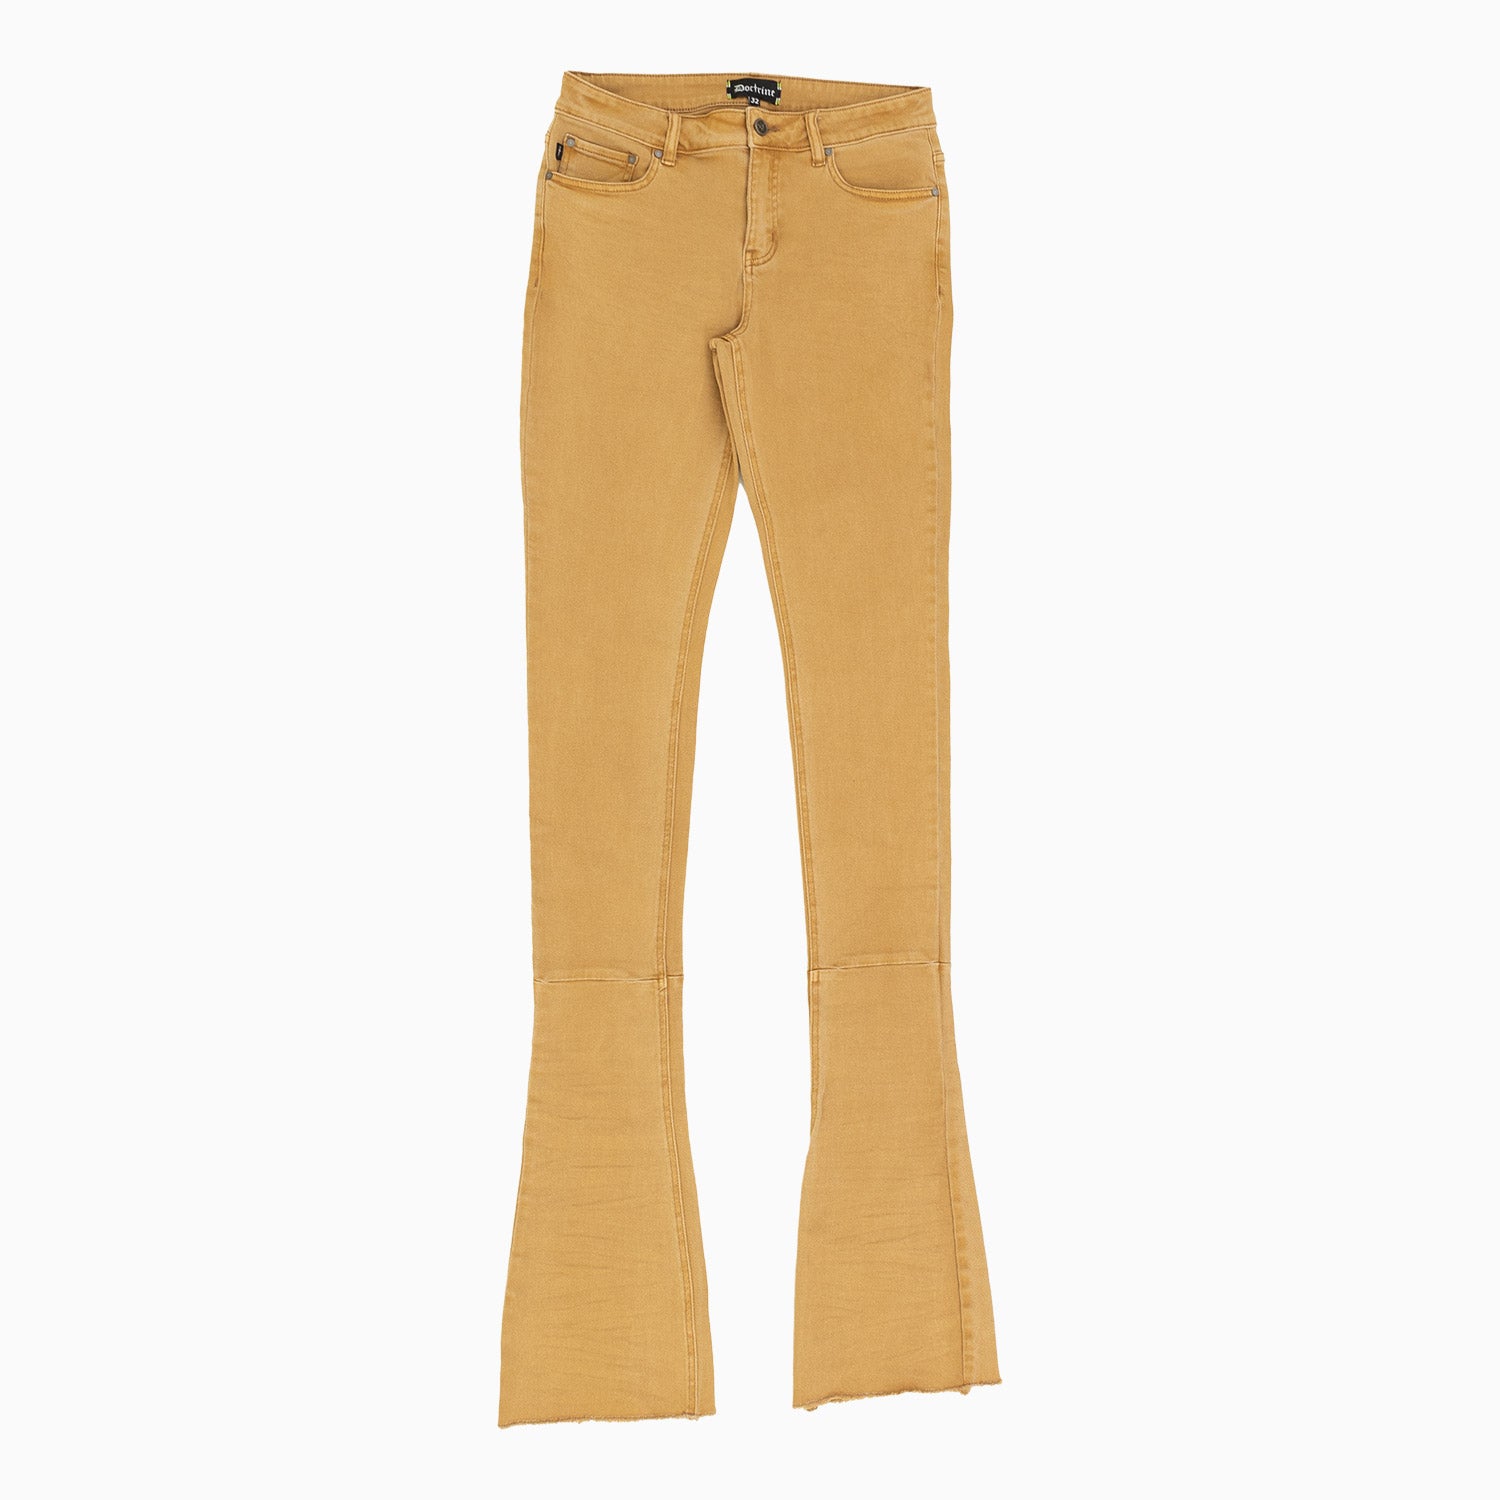 Men's Classic Brown Super Stacked Jean Pant